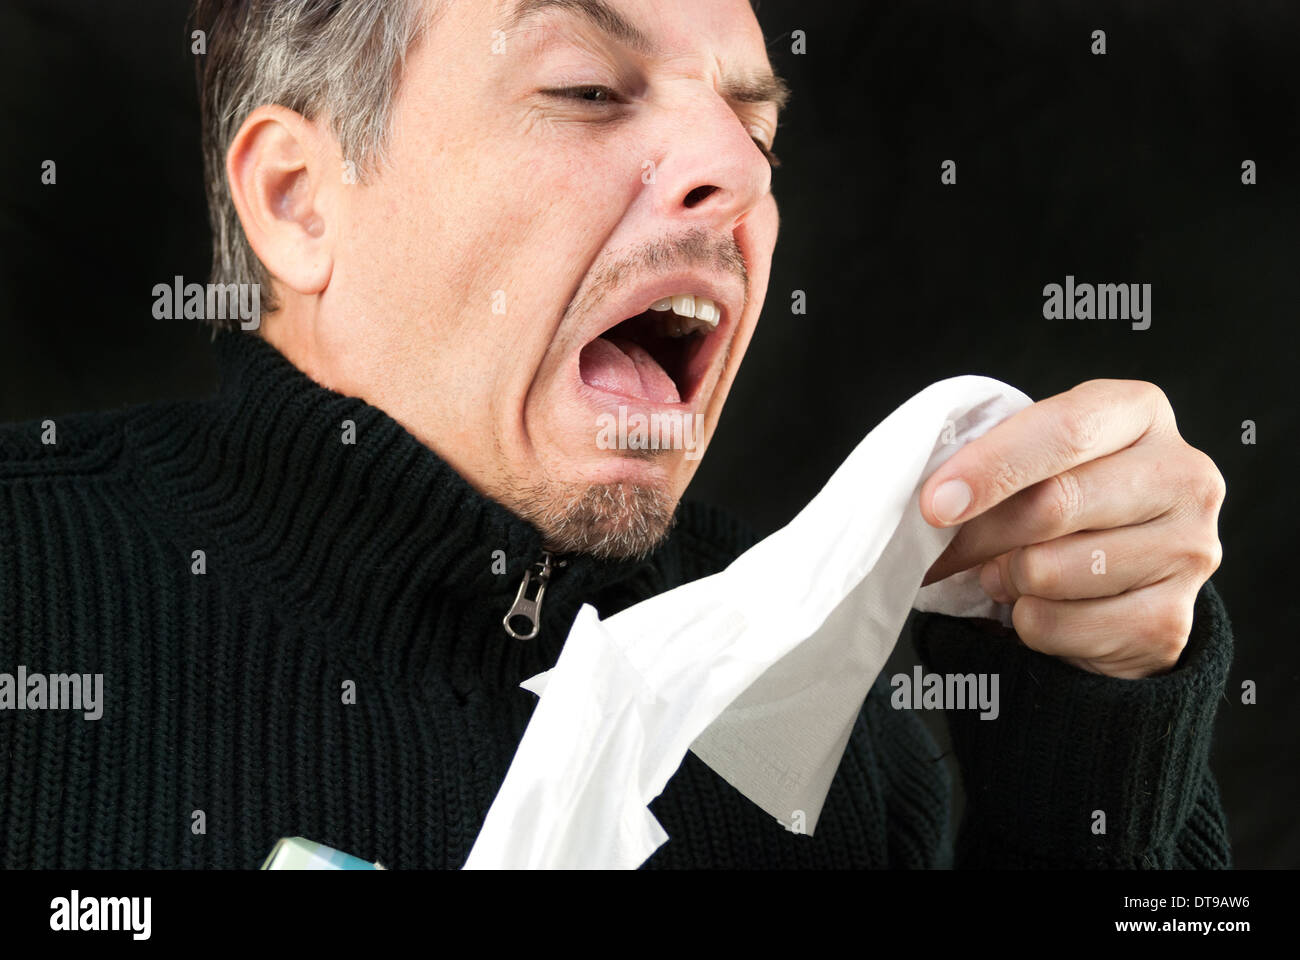 Close-up of a man sneezing while pulling a tissue out of the box. Stock Photo